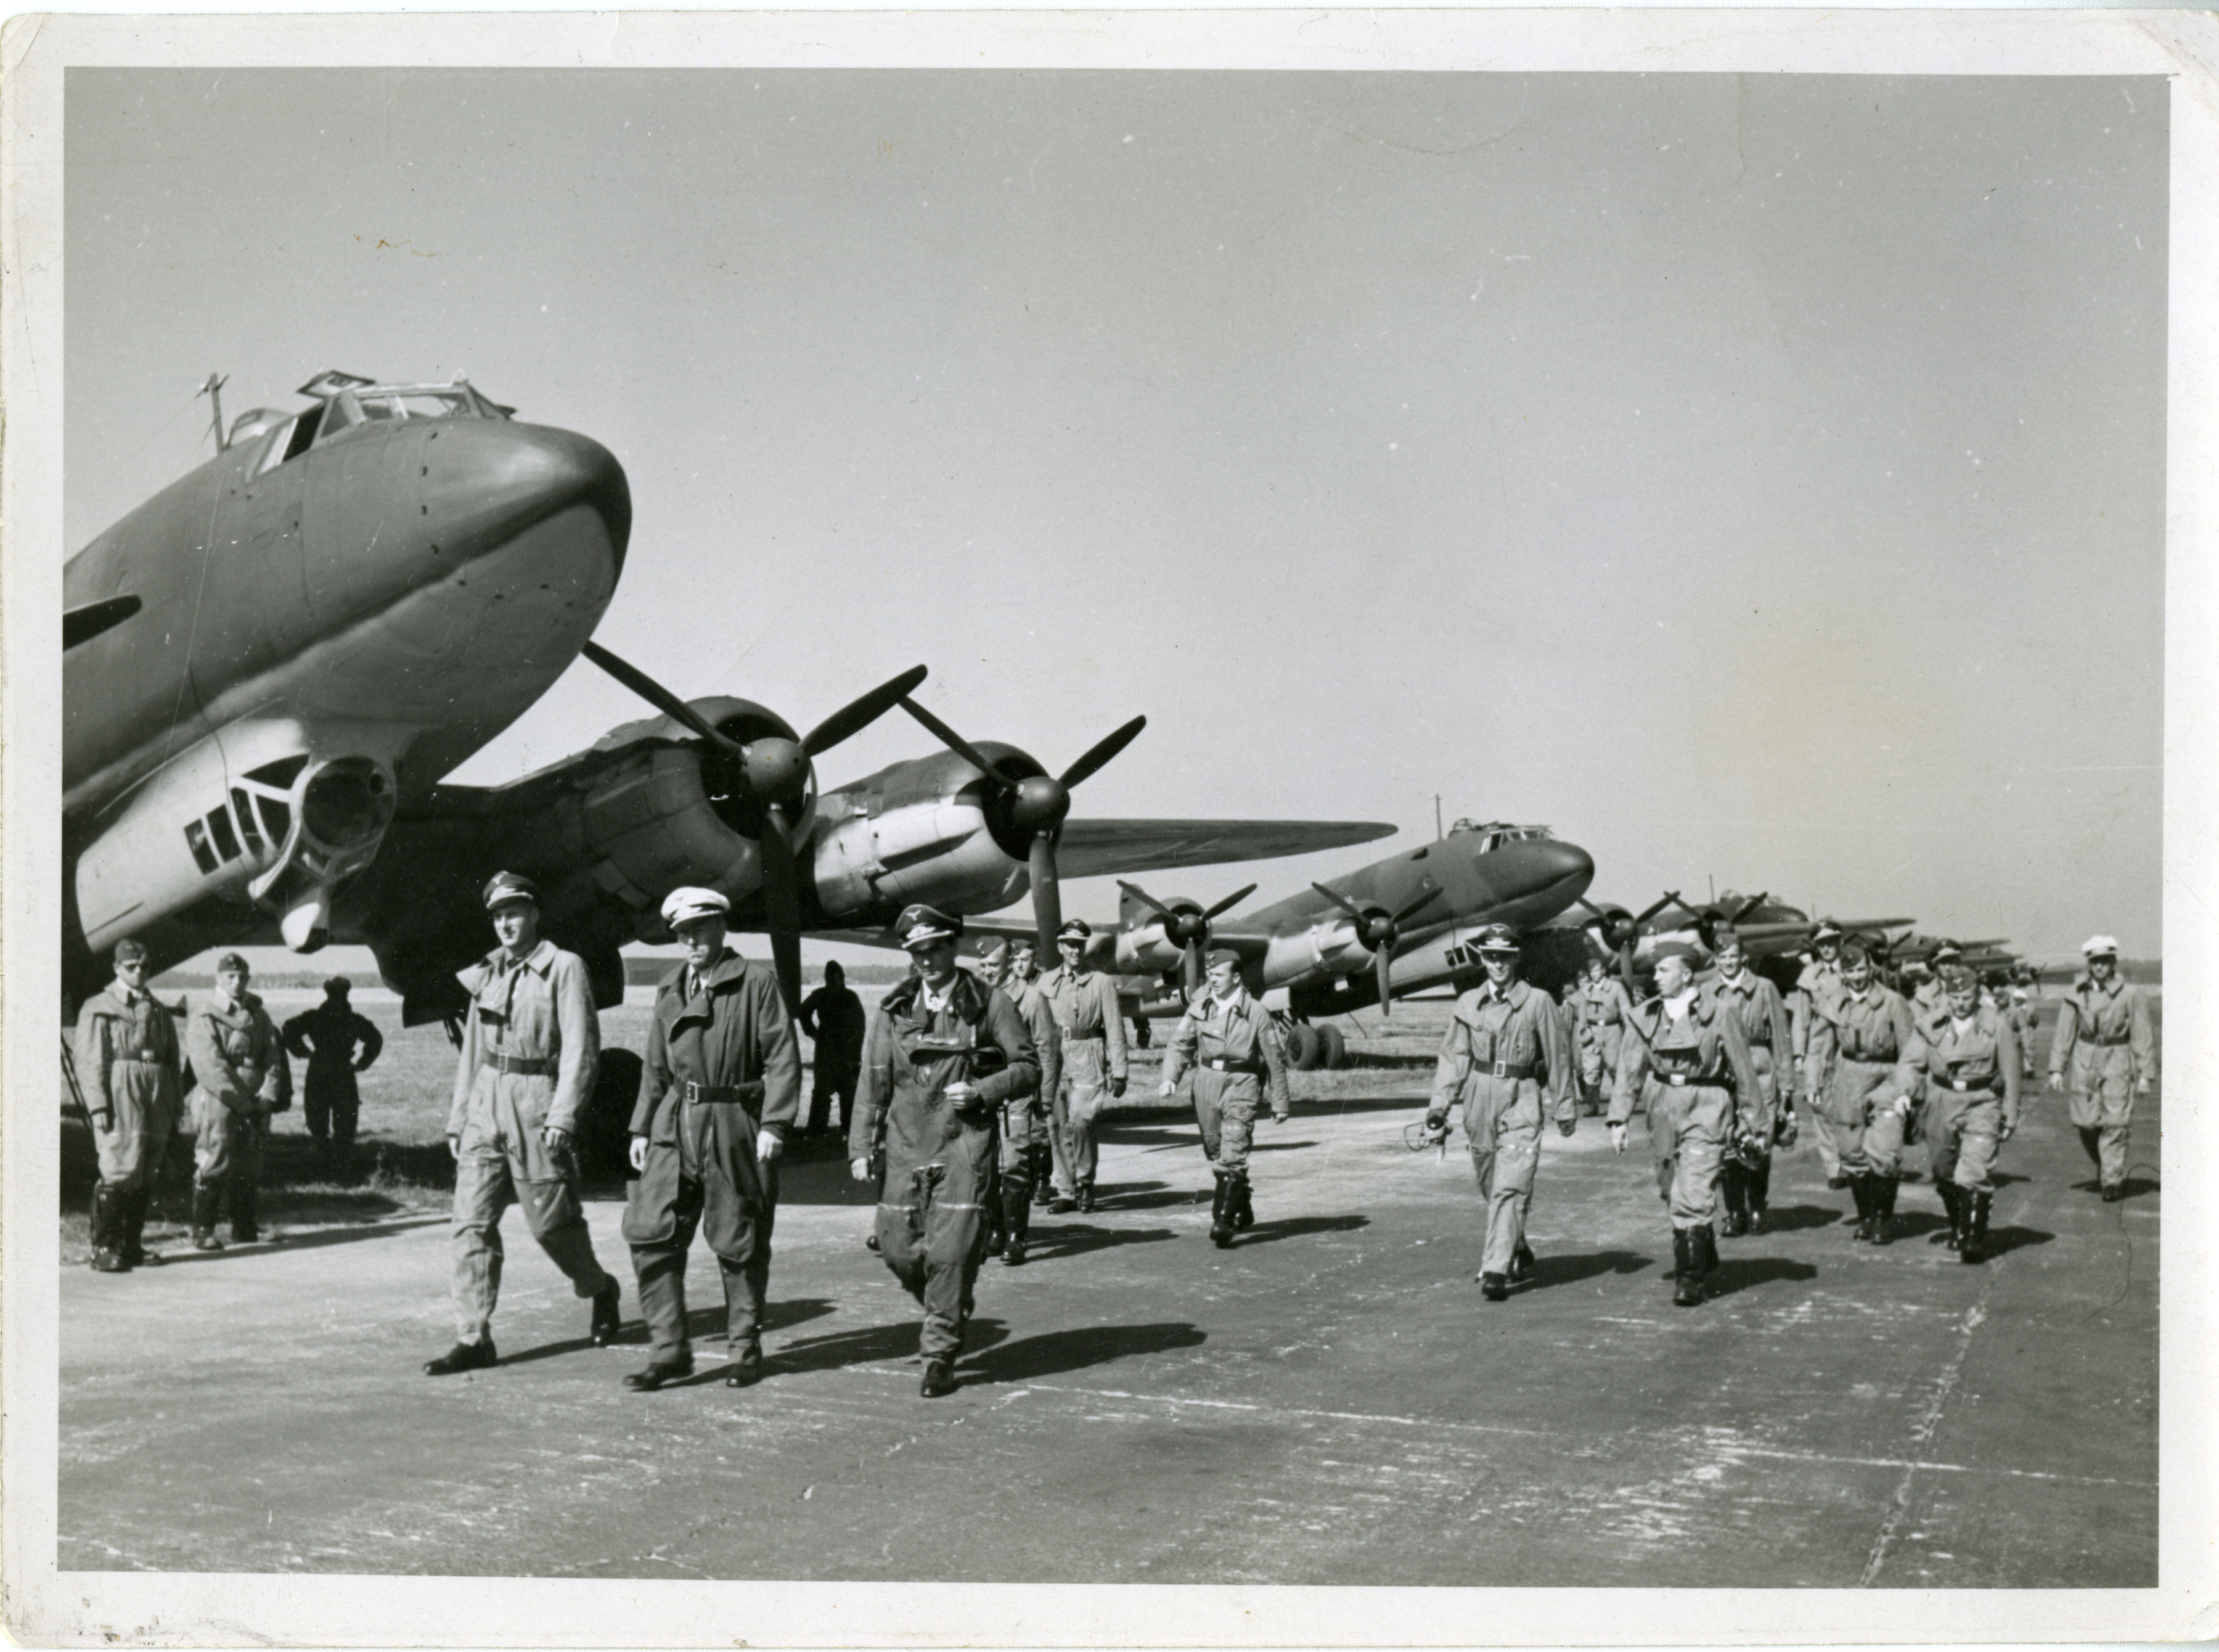 Bombers and air crews on an airfield, October 1941 | The Digital ...